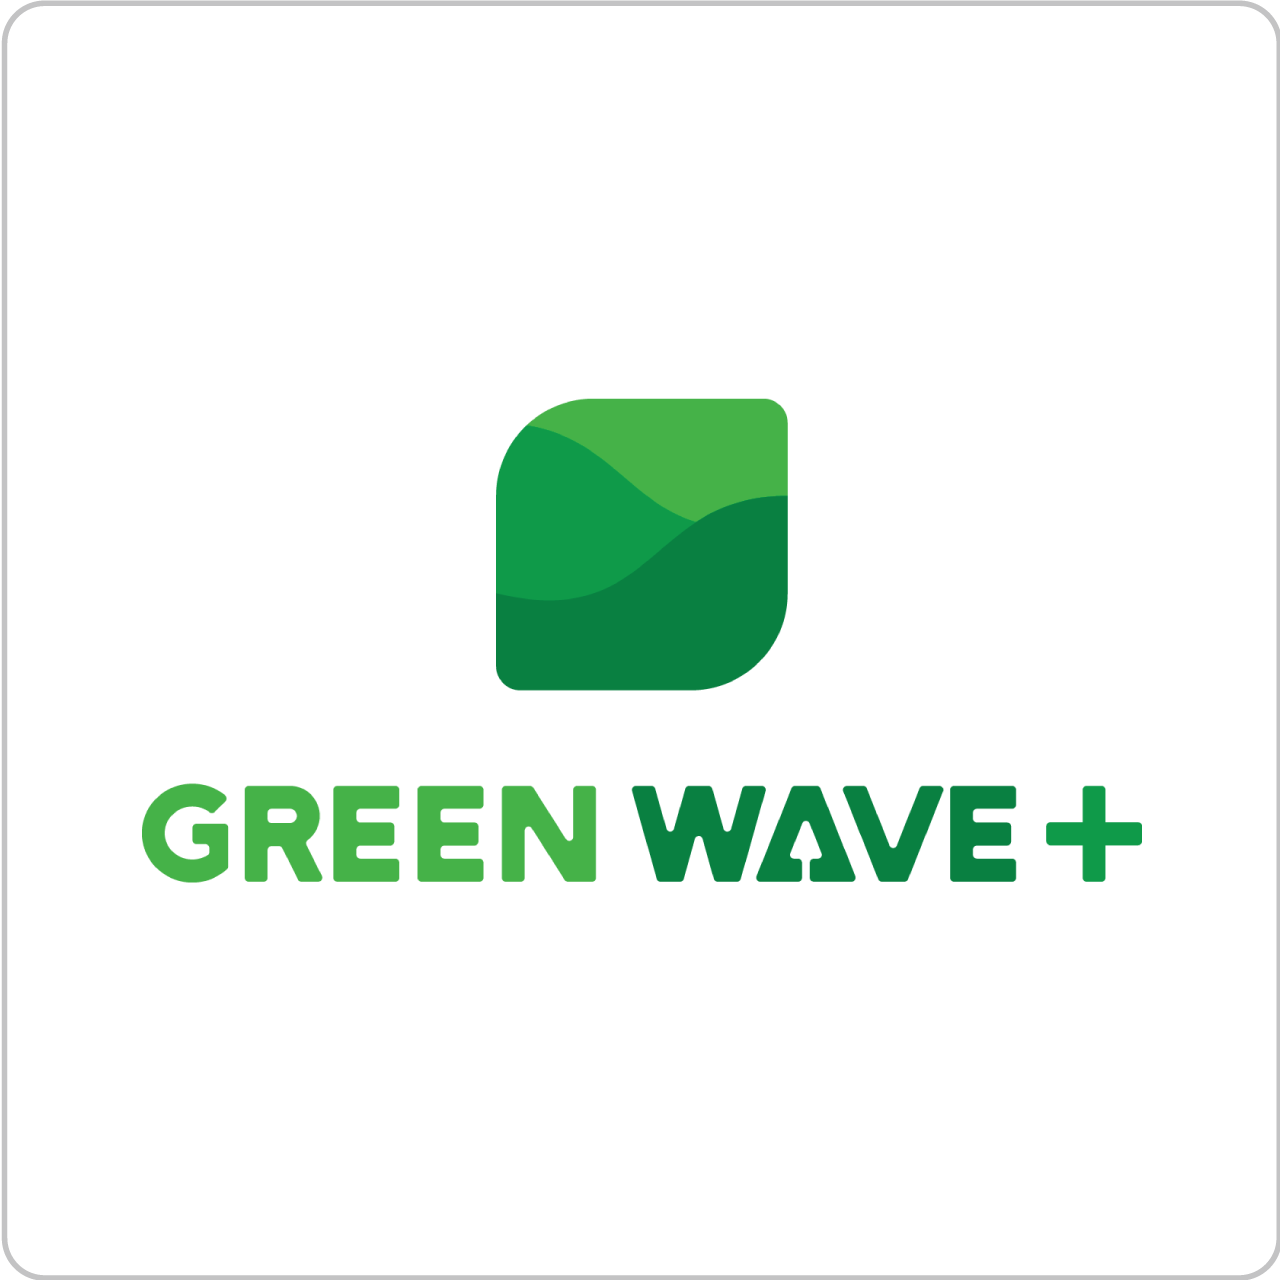 GREEN WAVE +